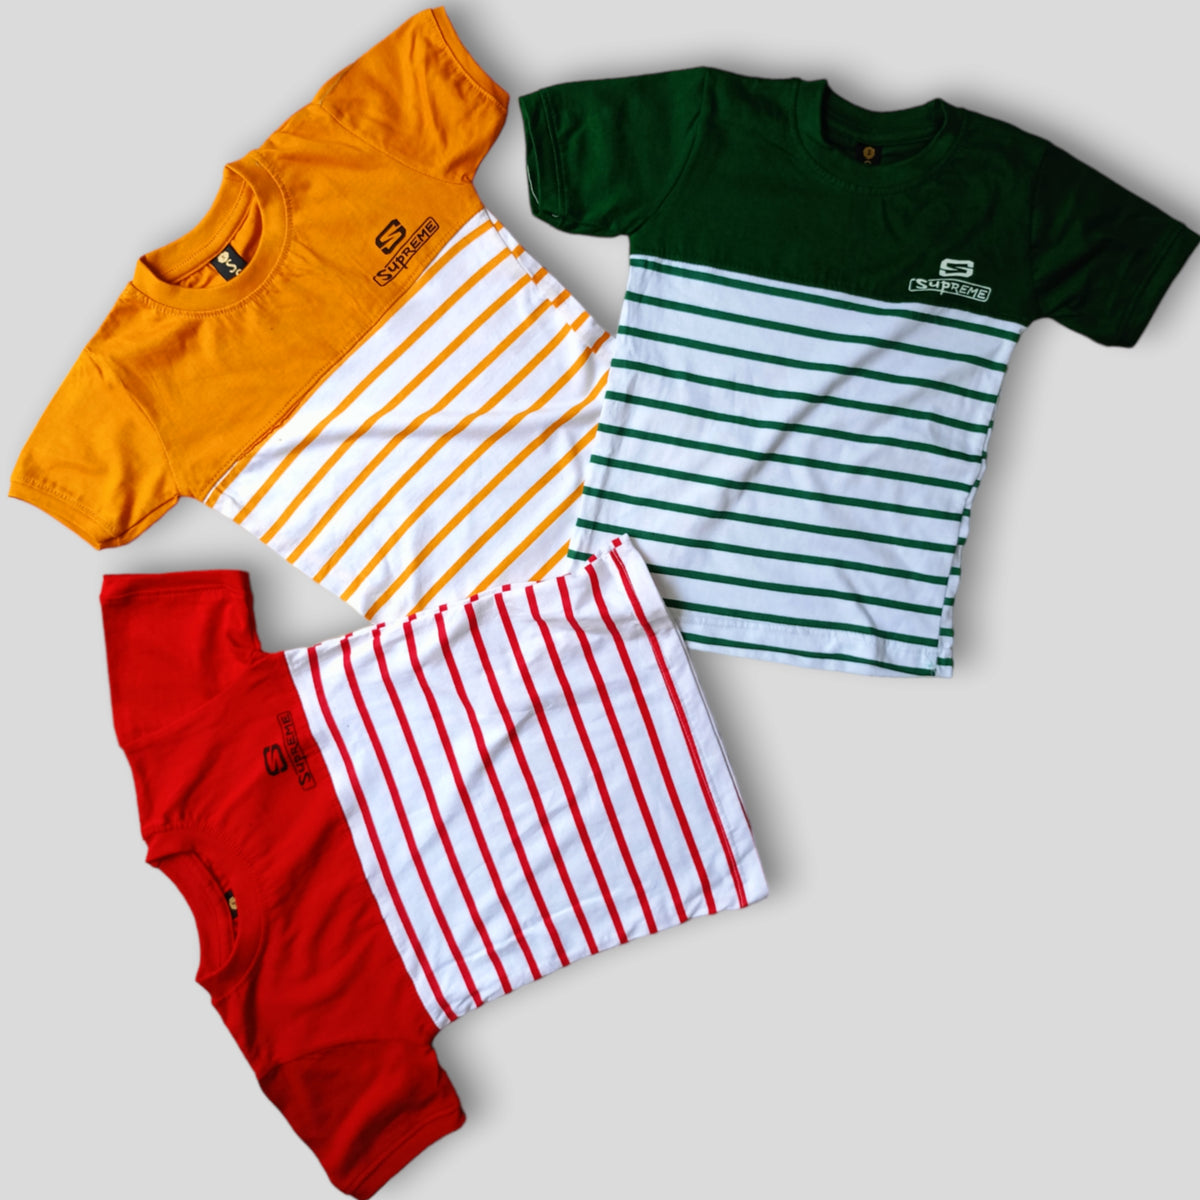 Stripped Style Pack Of 3 T-shirts For Boys/KIds